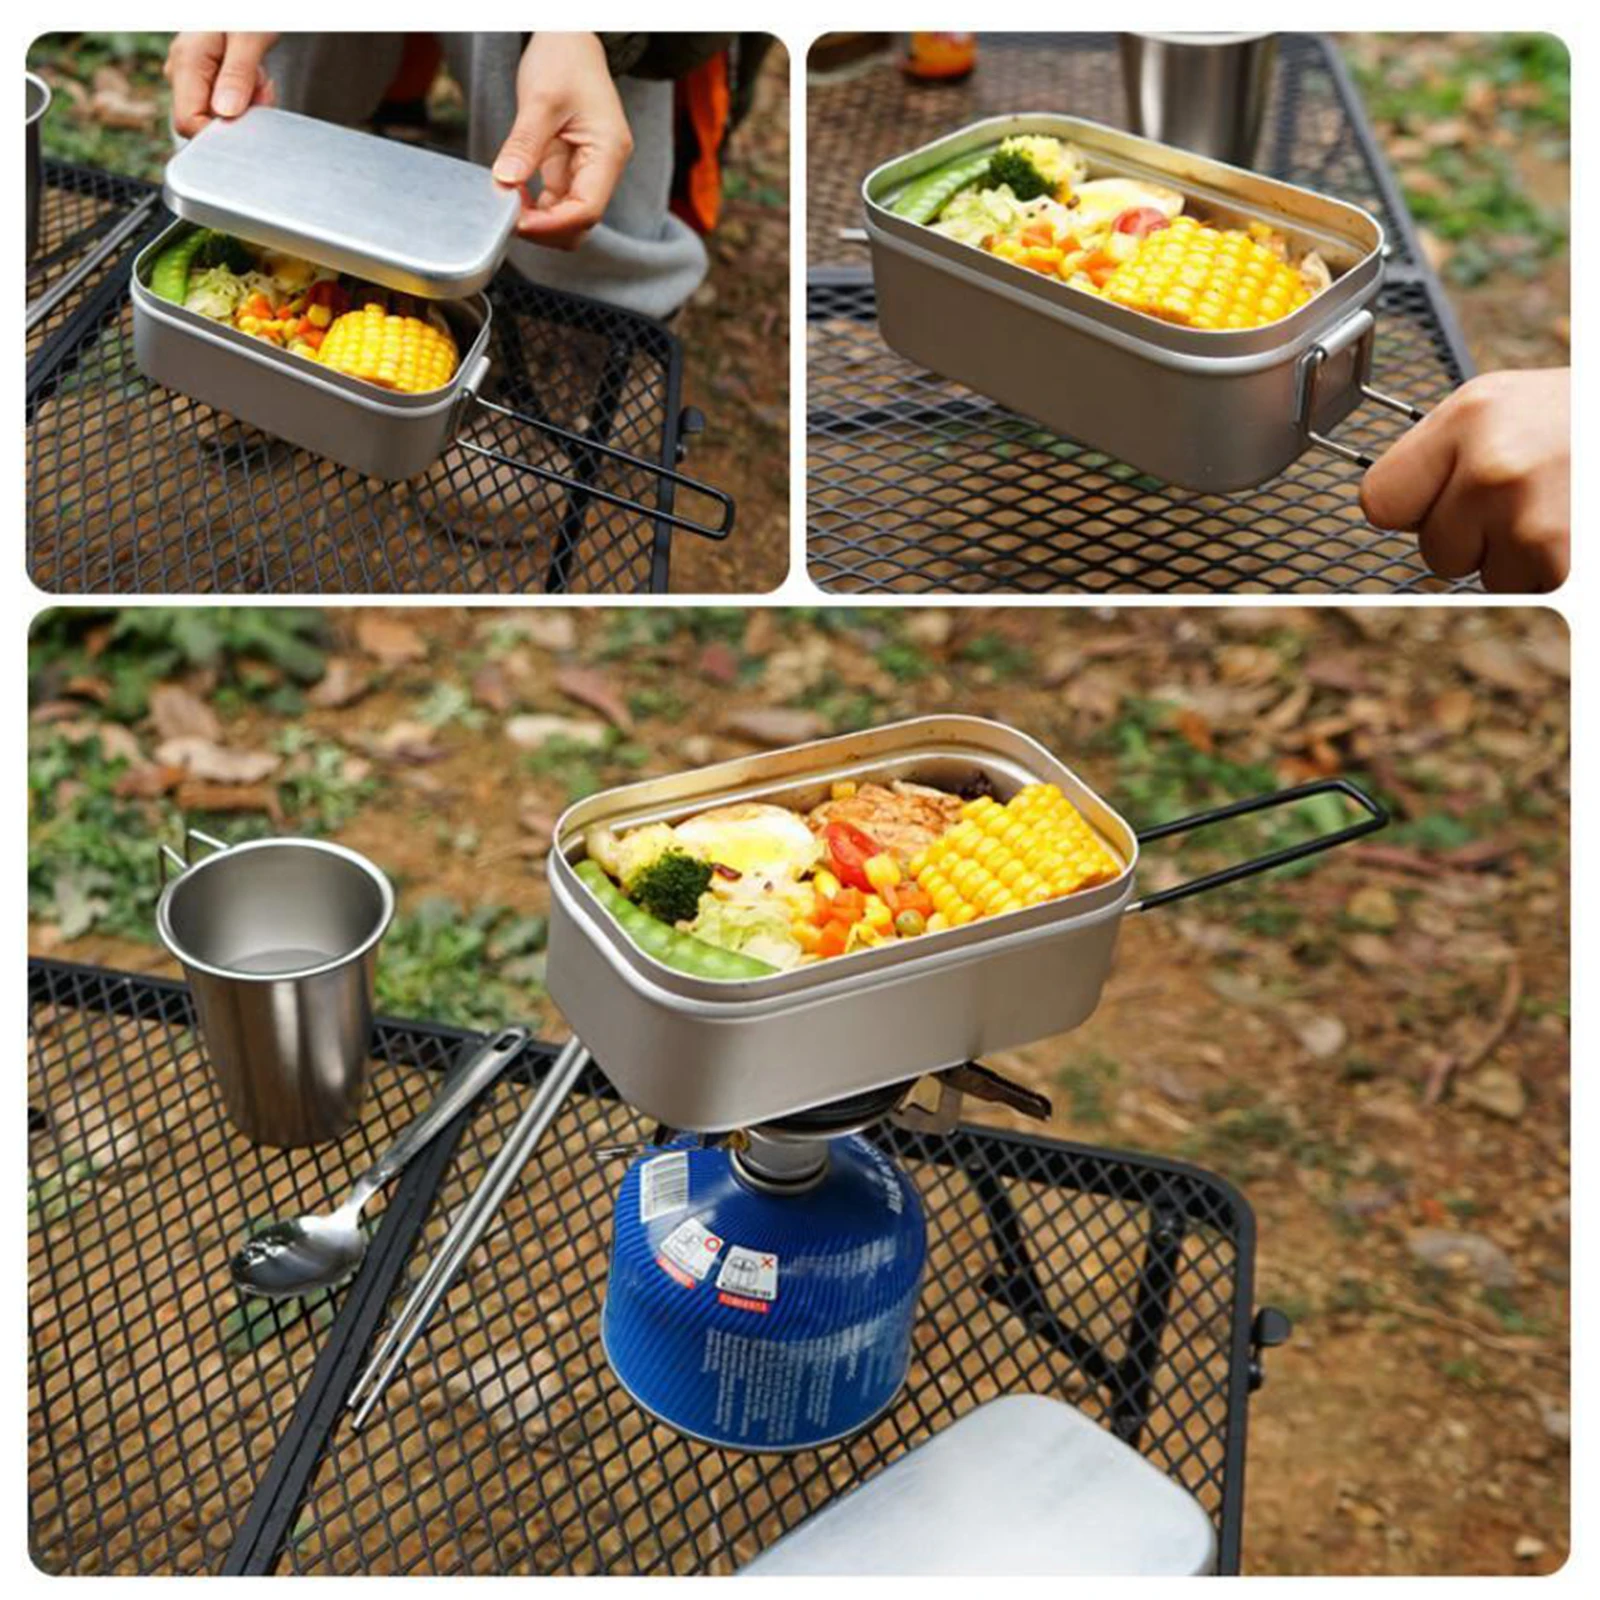 Outdoor Bento Lunch Box Steaming Rack Food Container w/ Foldable Handle for Camping BBQ Picnic Office Travel Cooking Cookware